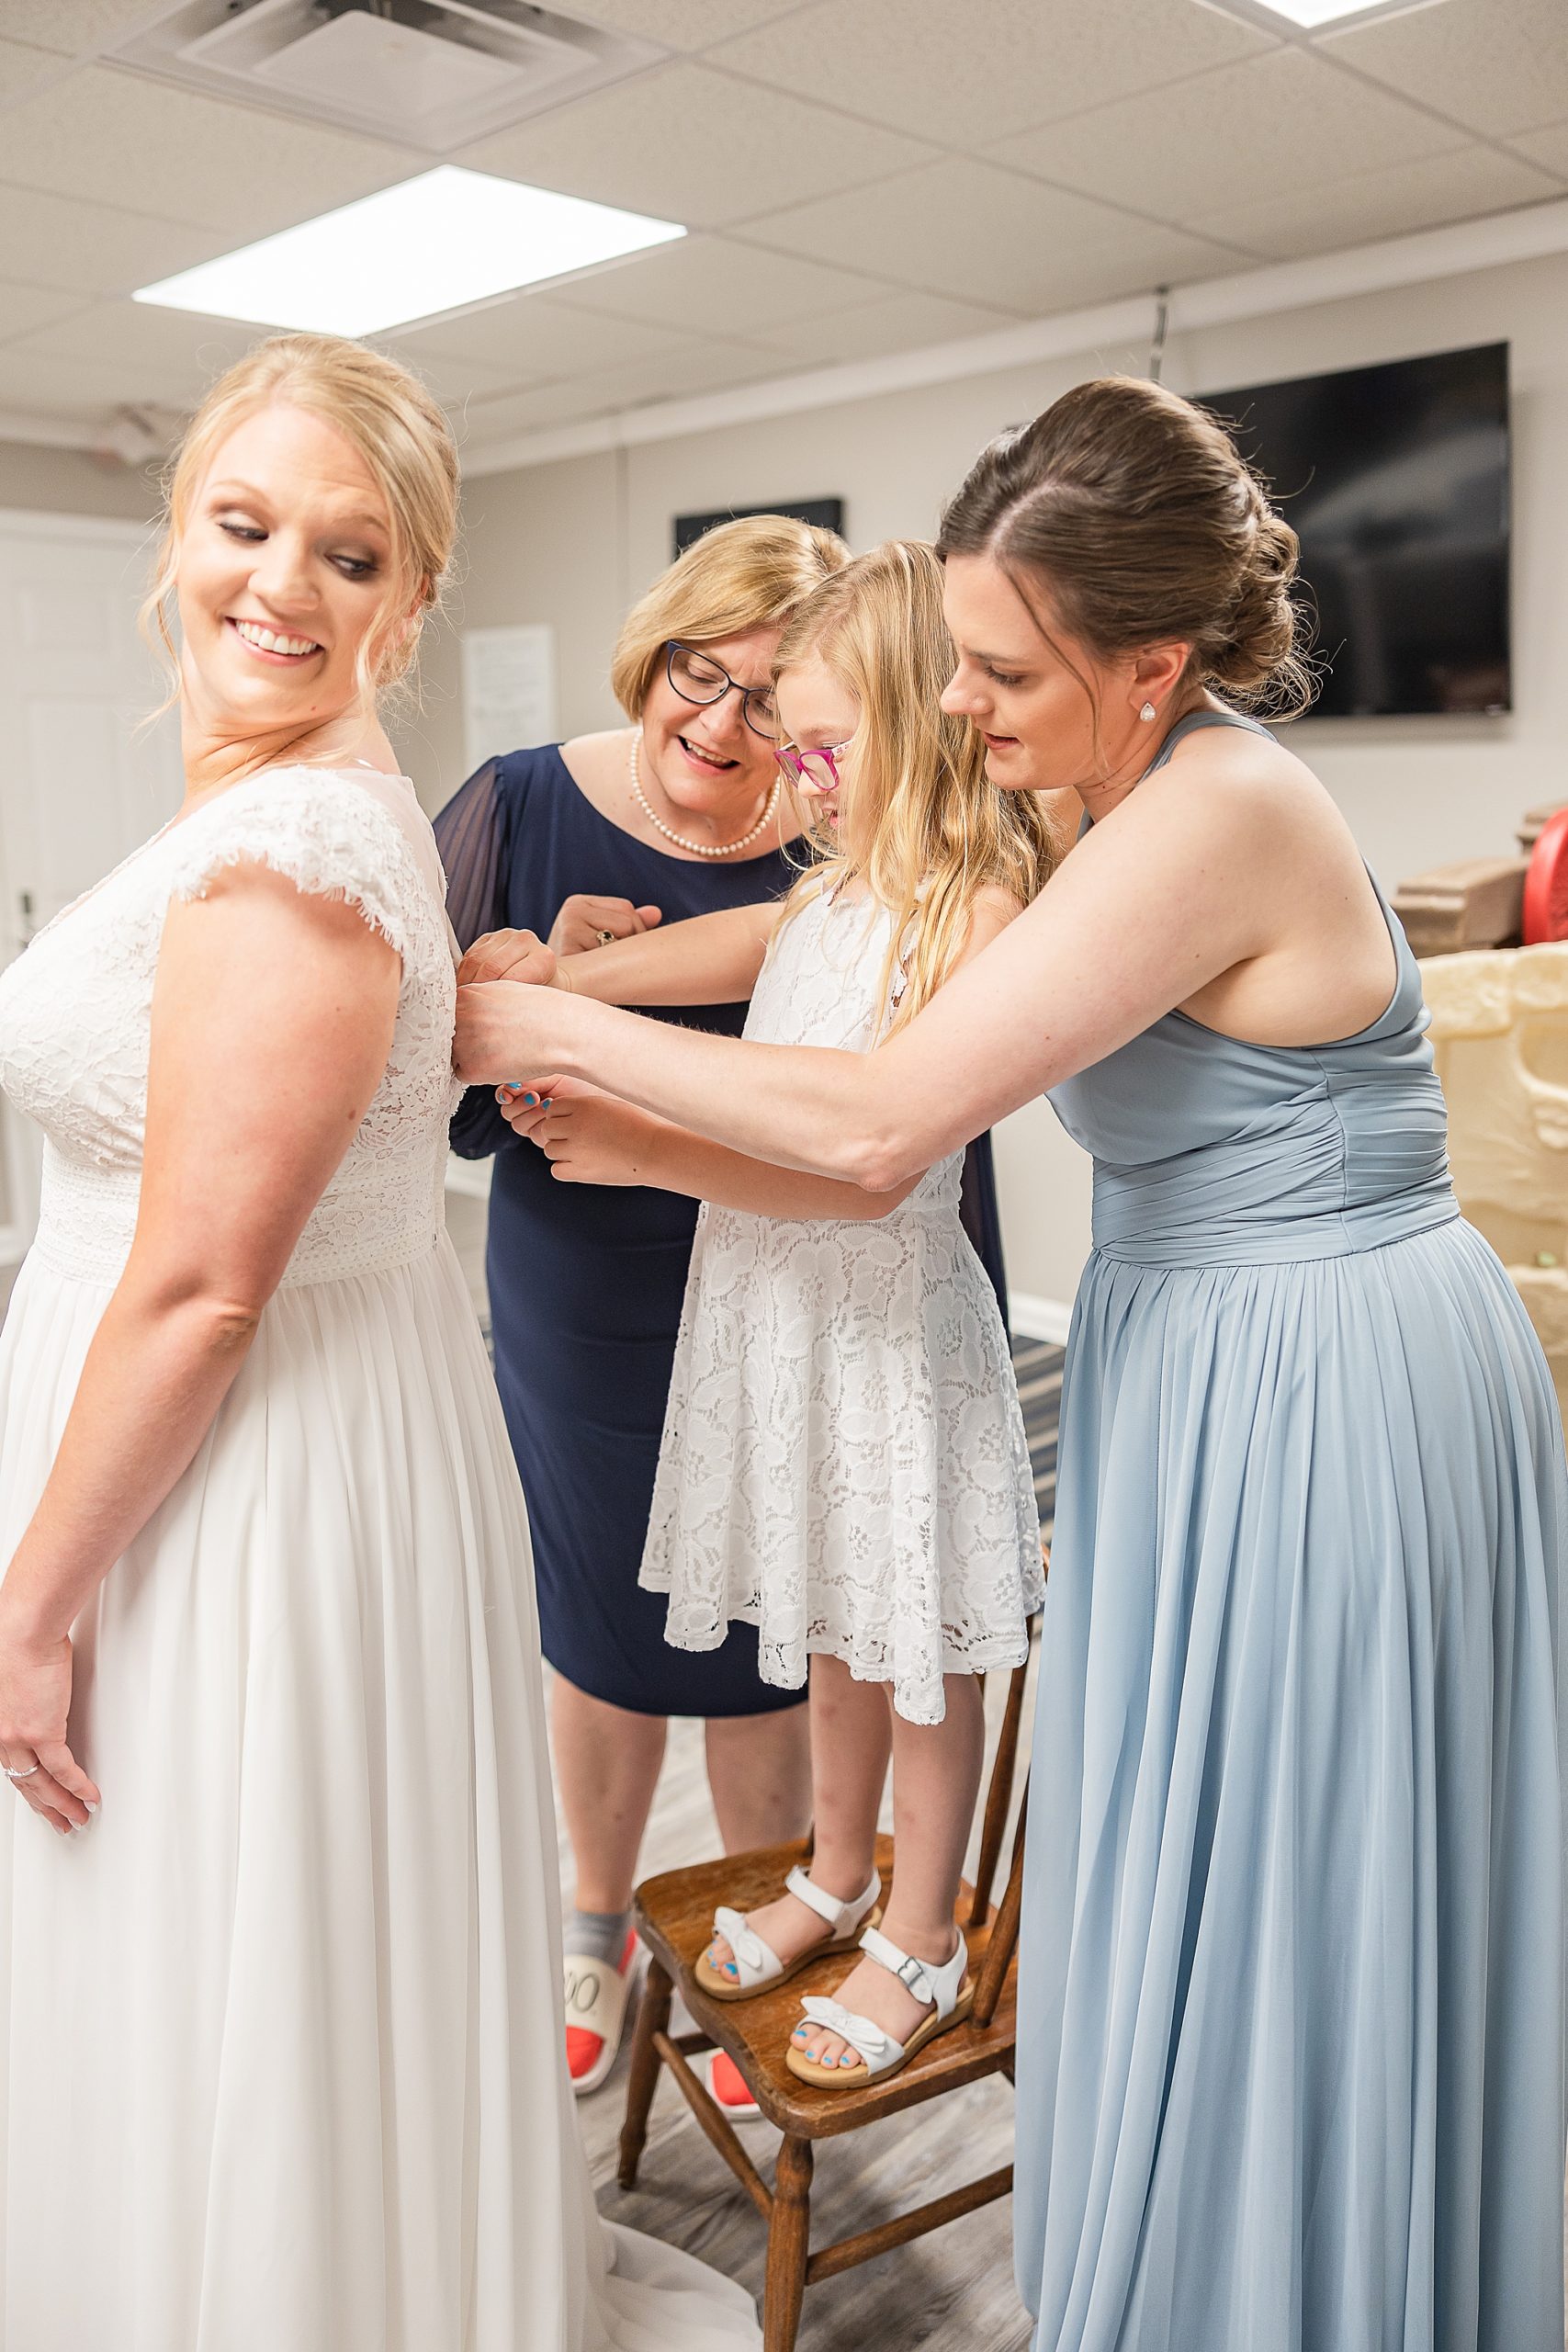 bridesmaid in blue gown helps bride with gown